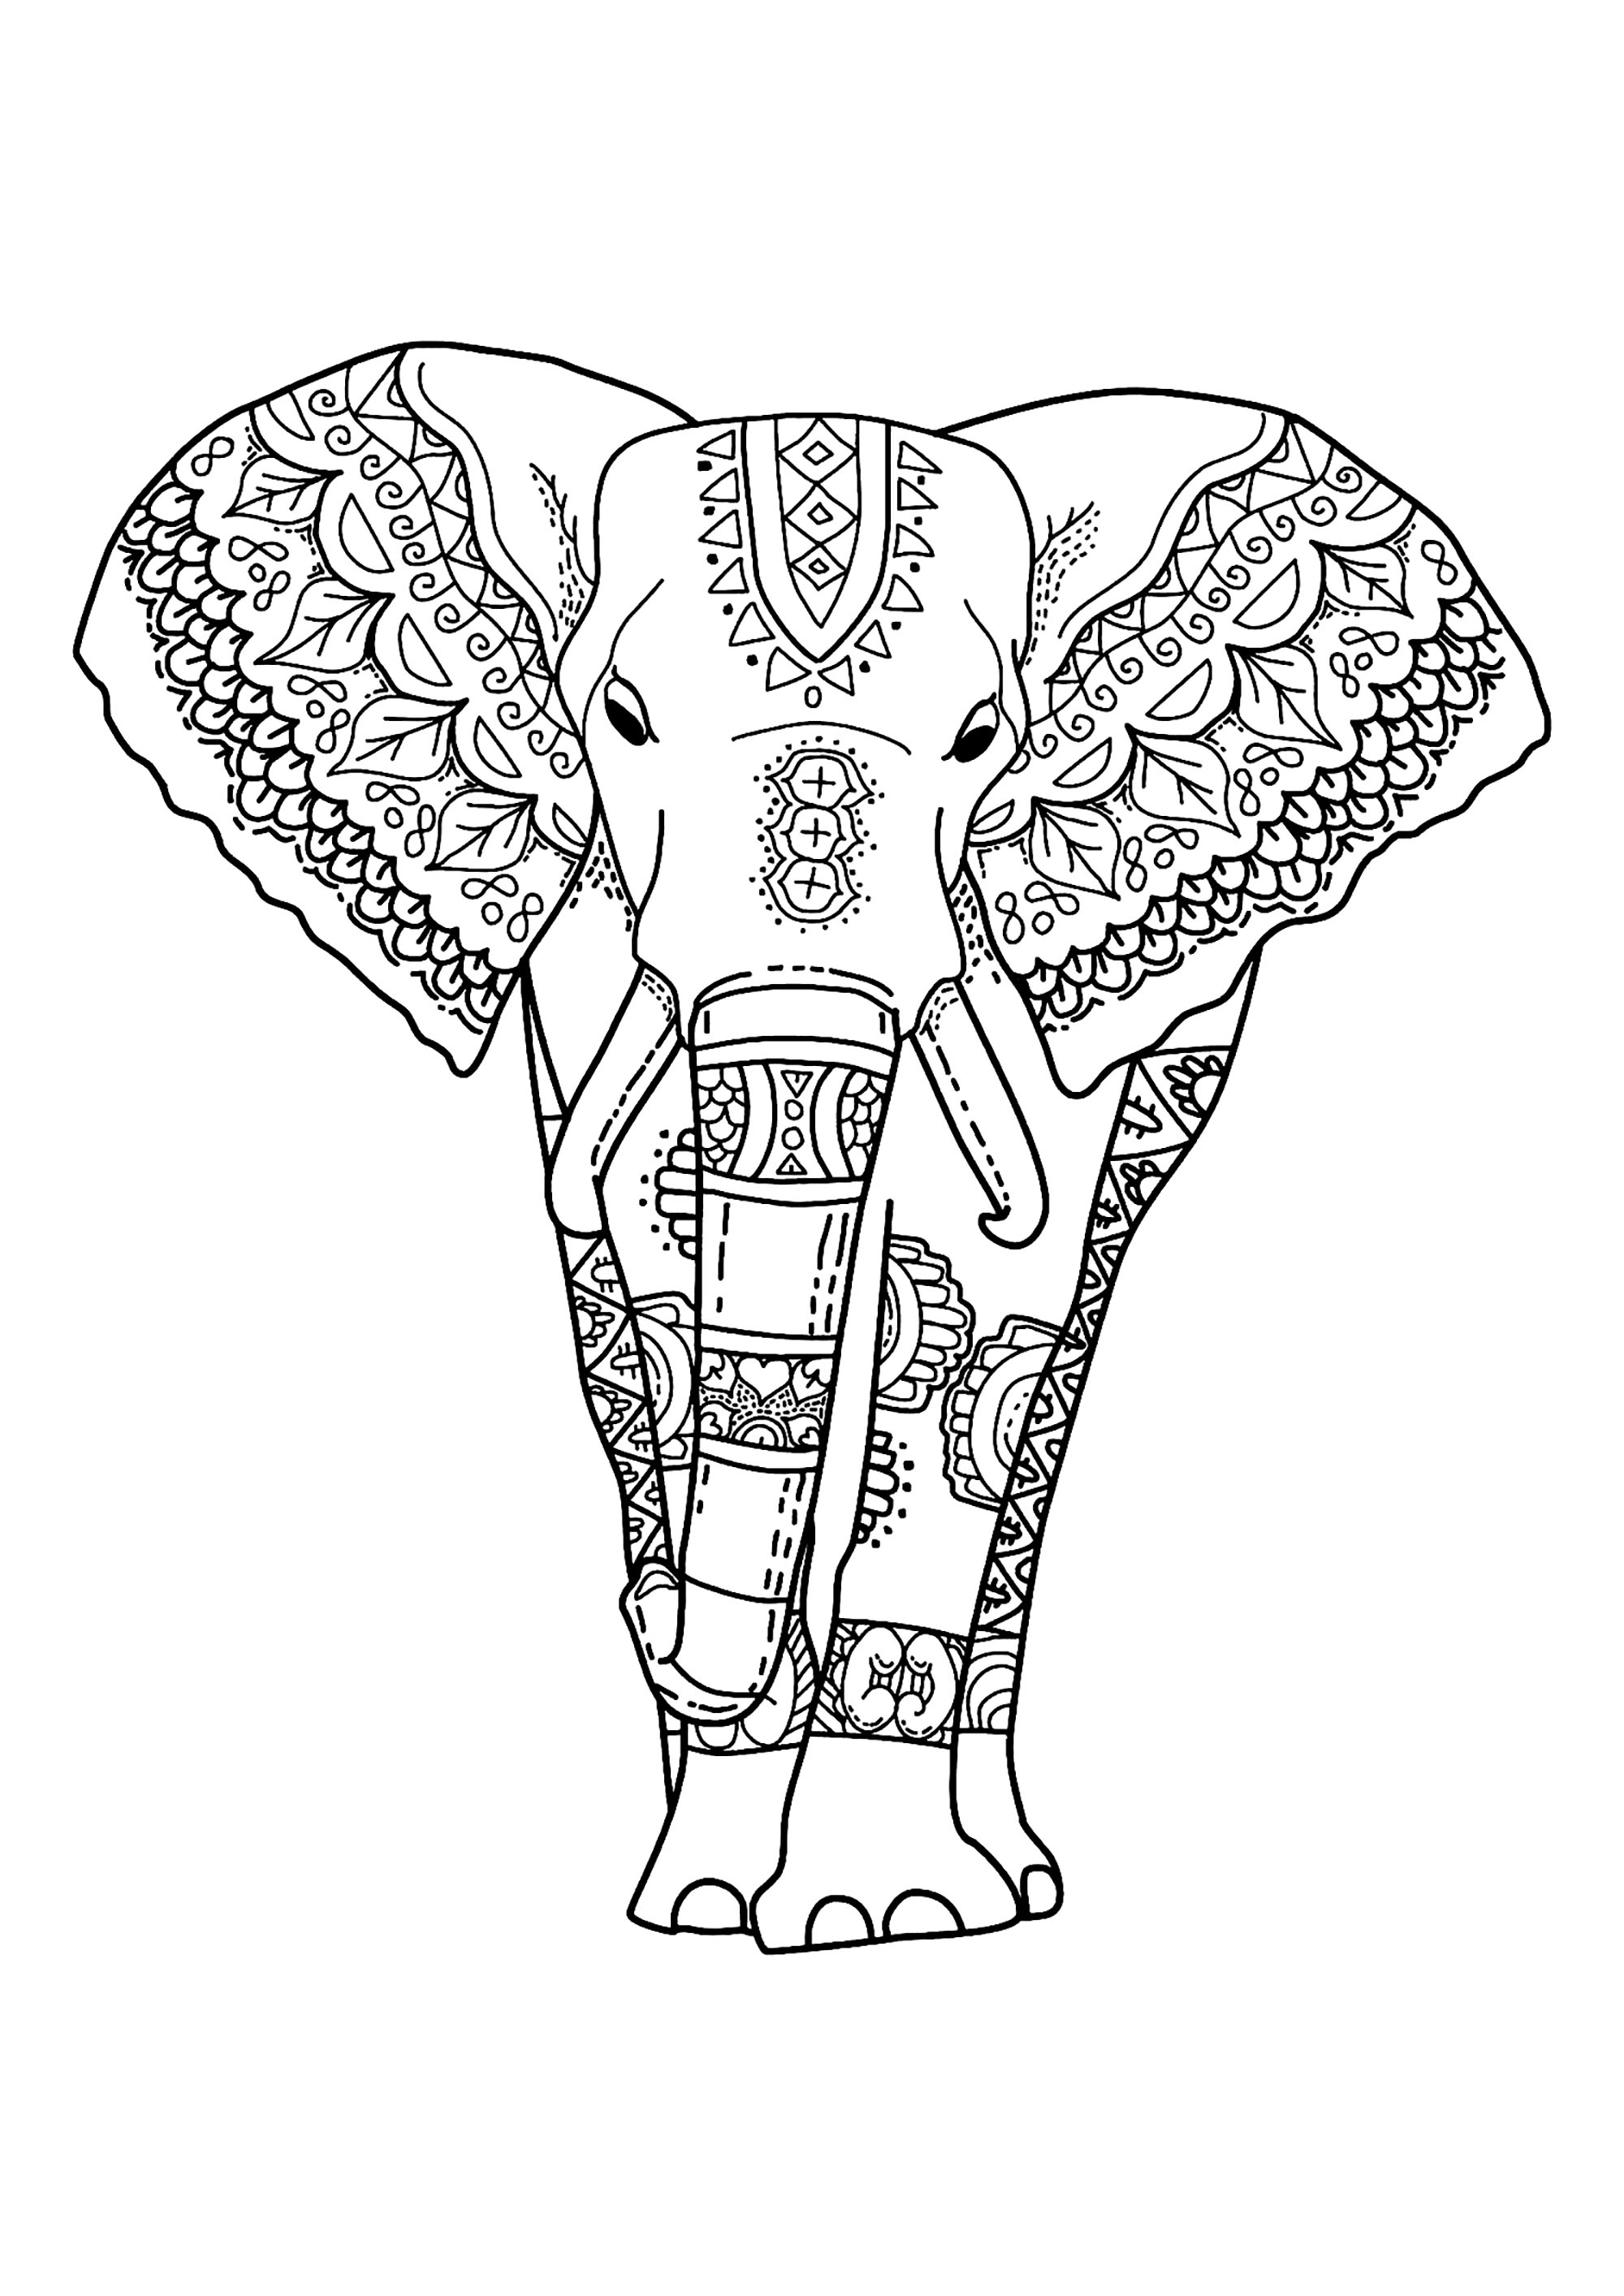 Download Elephants to color for children - Elephants Kids Coloring Pages